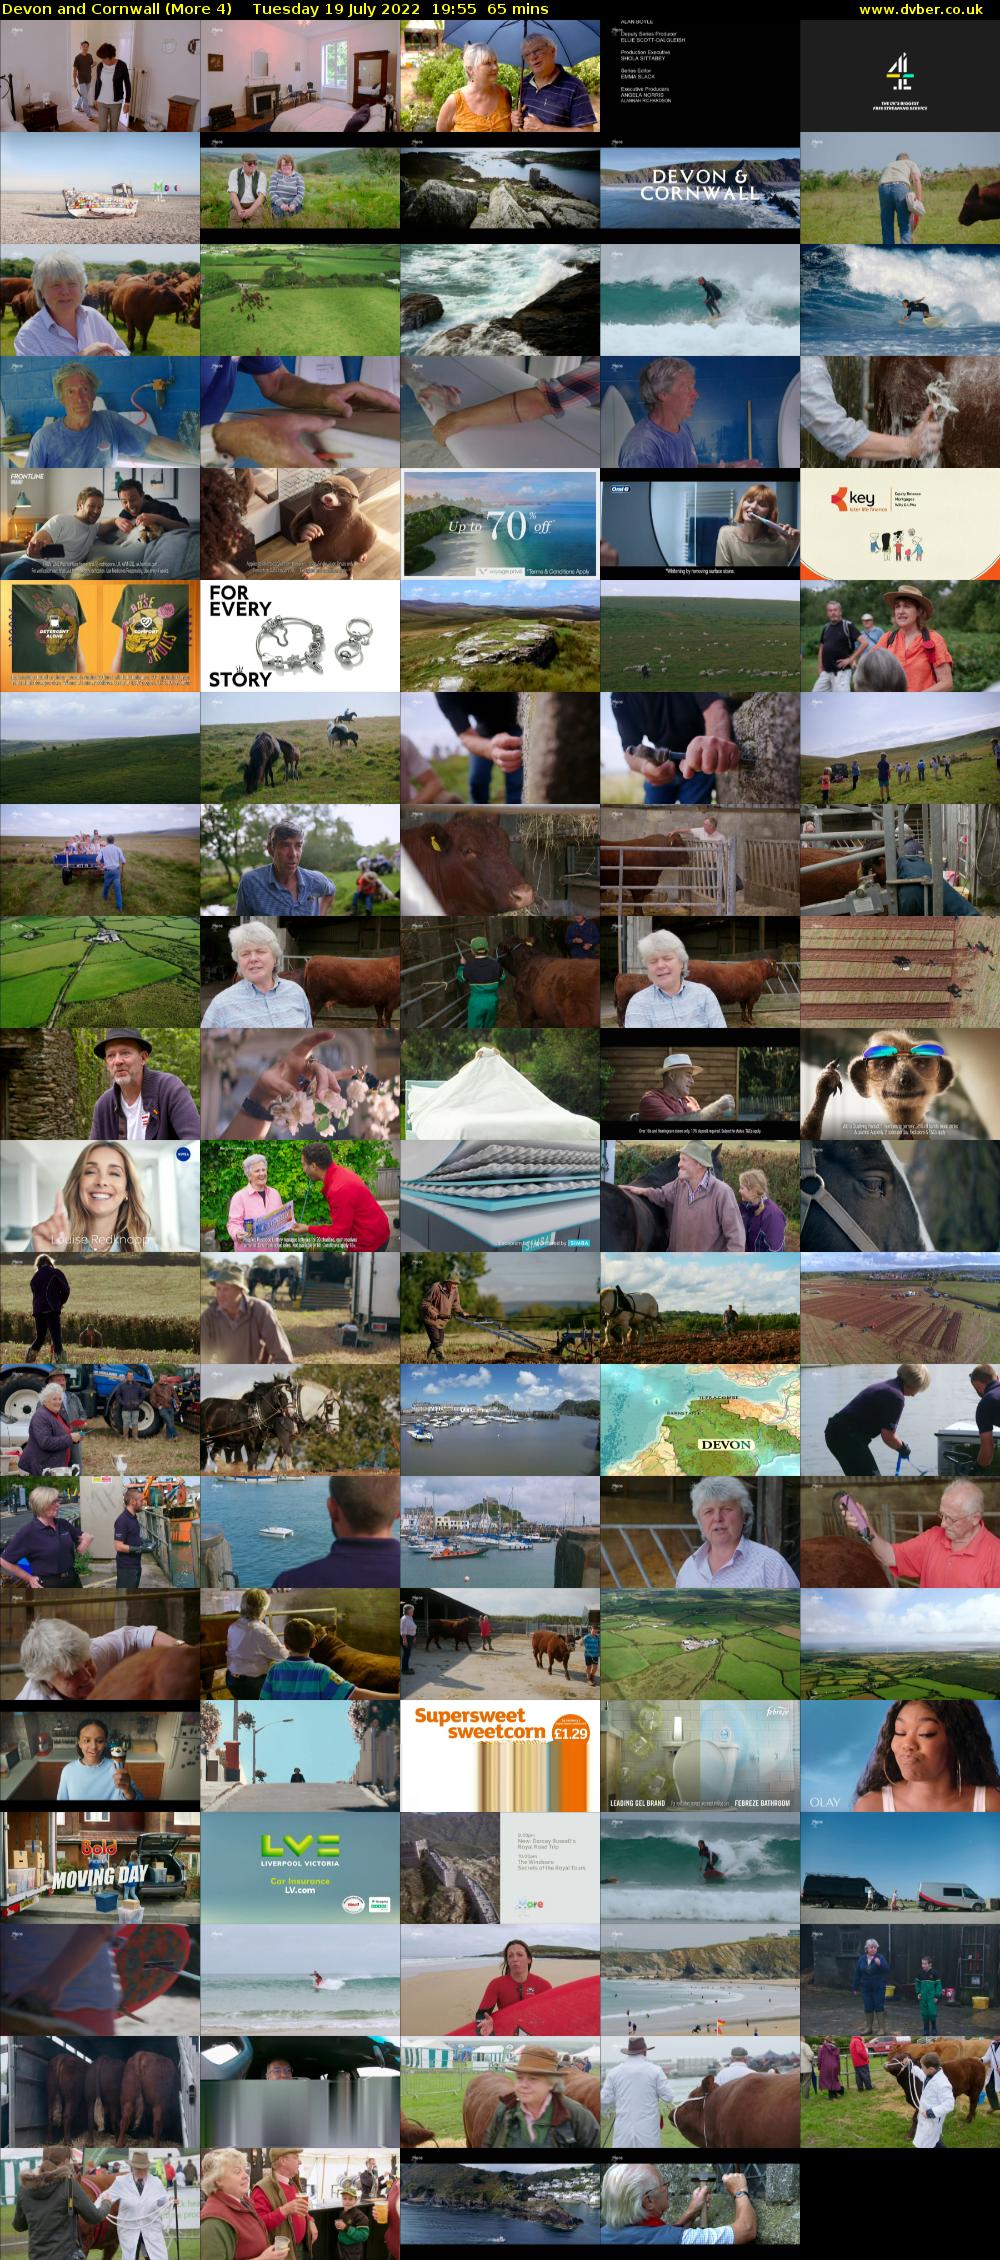 Devon and Cornwall (More 4) Tuesday 19 July 2022 19:55 - 21:00